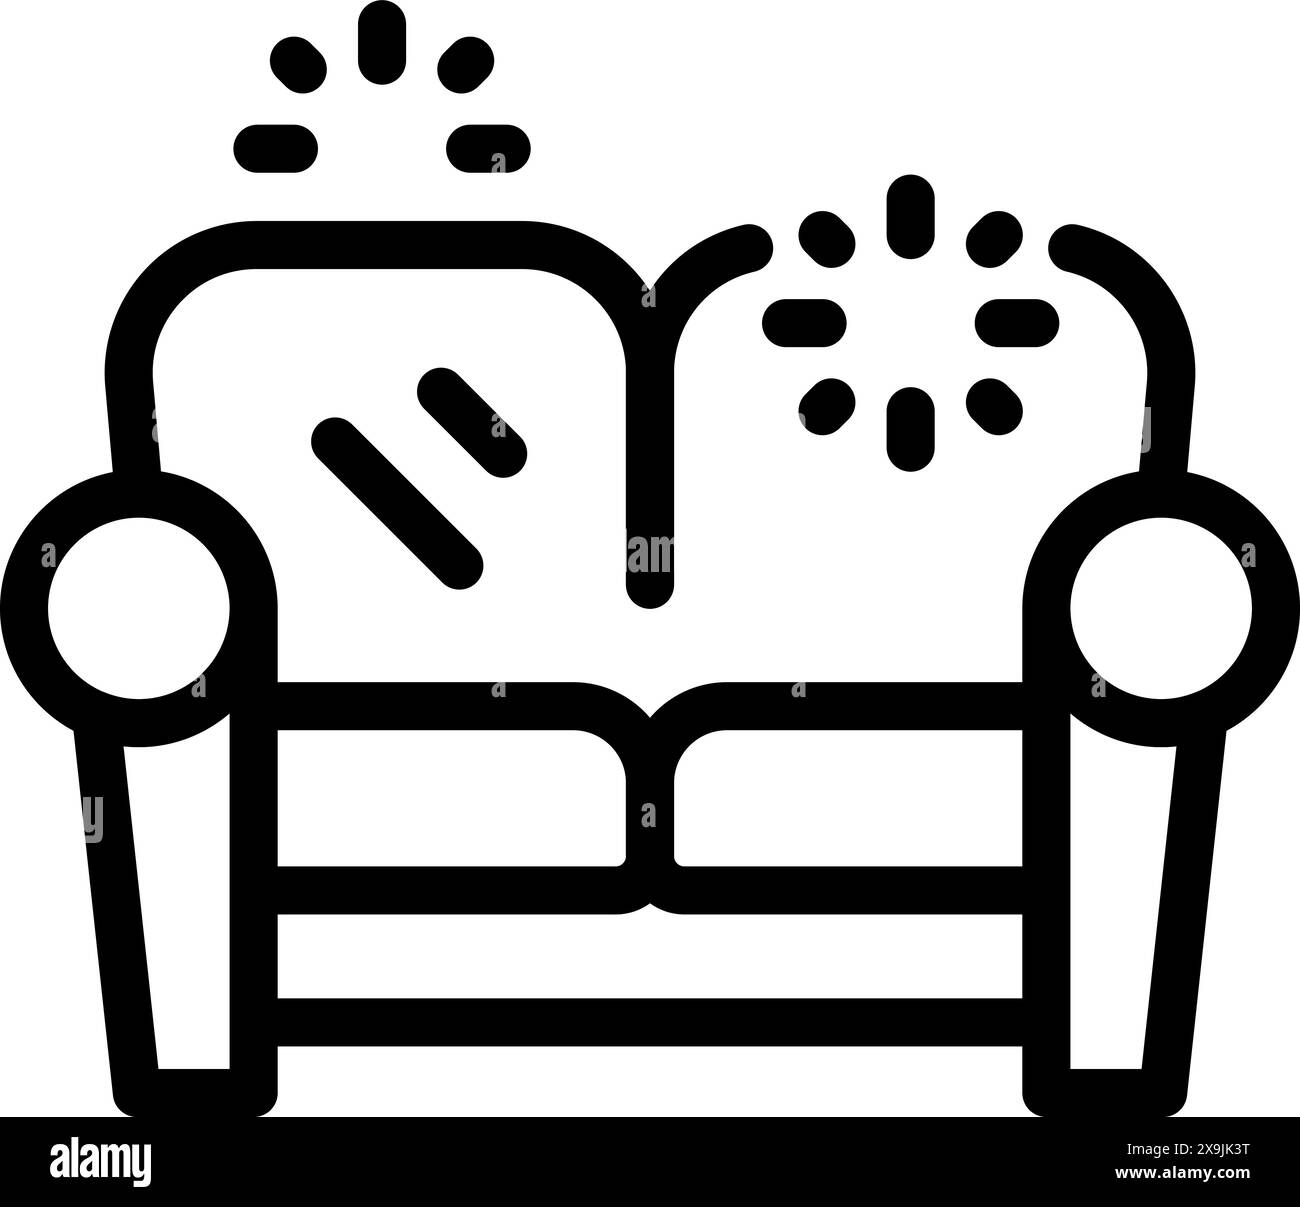 Simple line art vector icon depicting a comfortable twoseater sofa Stock Vector